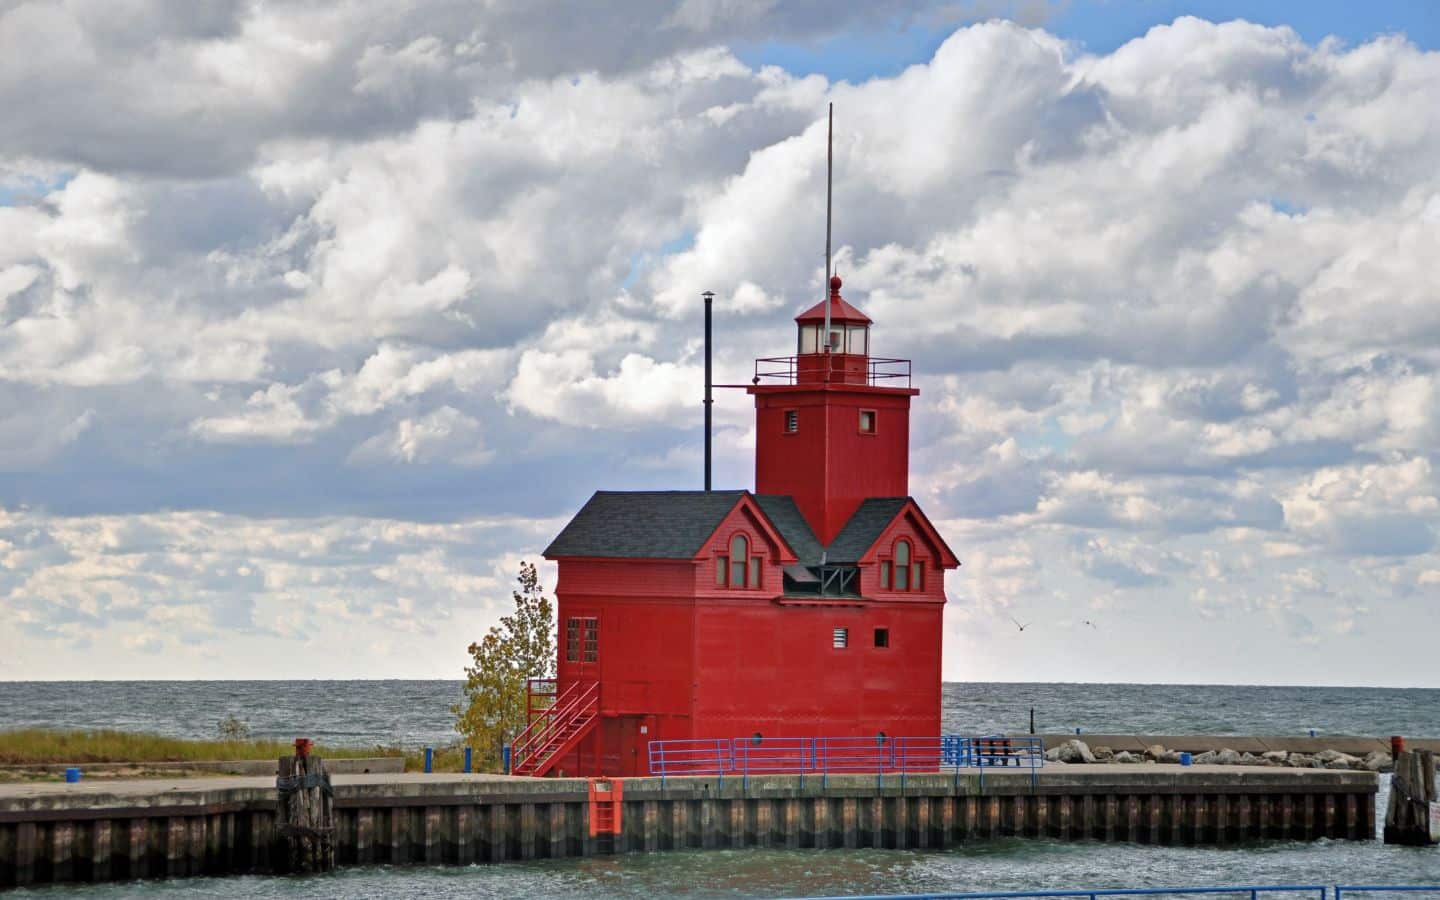 the iconic big red lighthouse on the shore of Holland, michigan